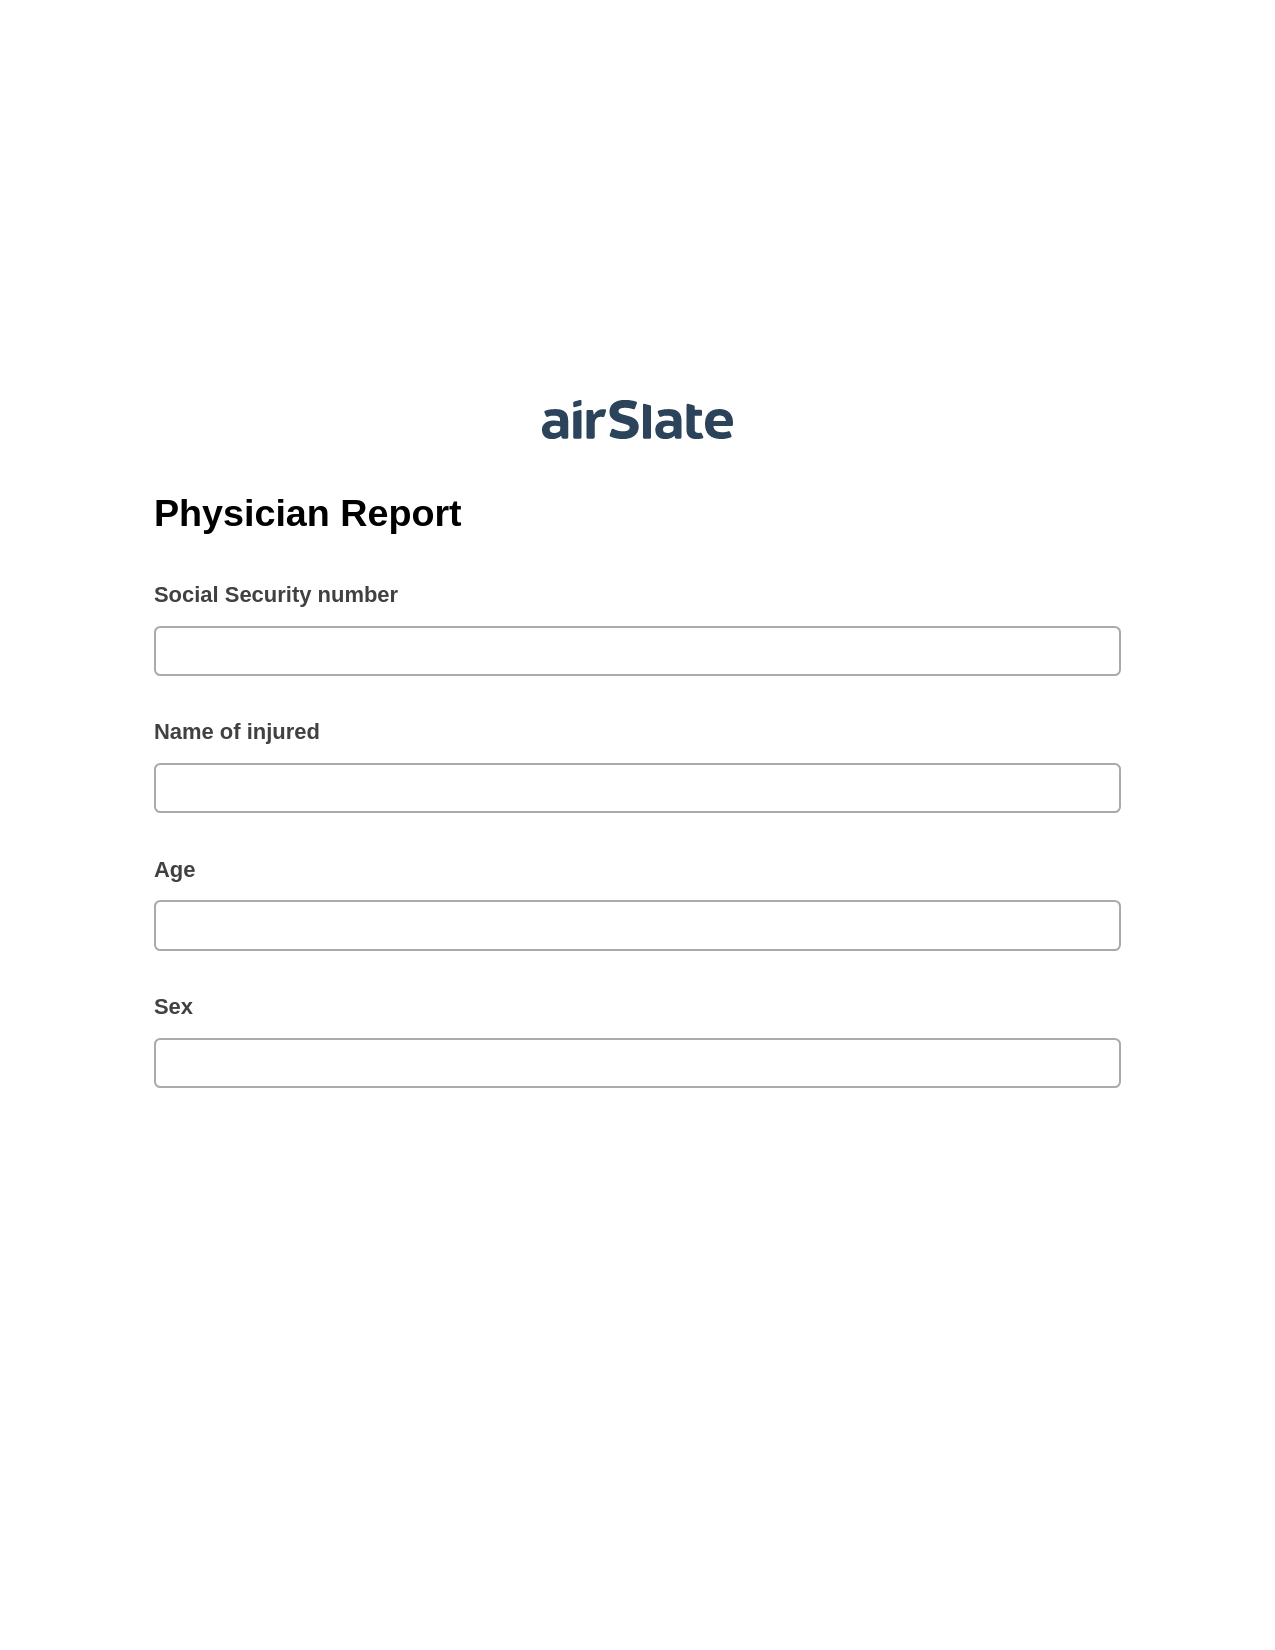 Physician Report Pre-fill Document Bot, Update NetSuite Record Bot, Export to NetSuite Bot